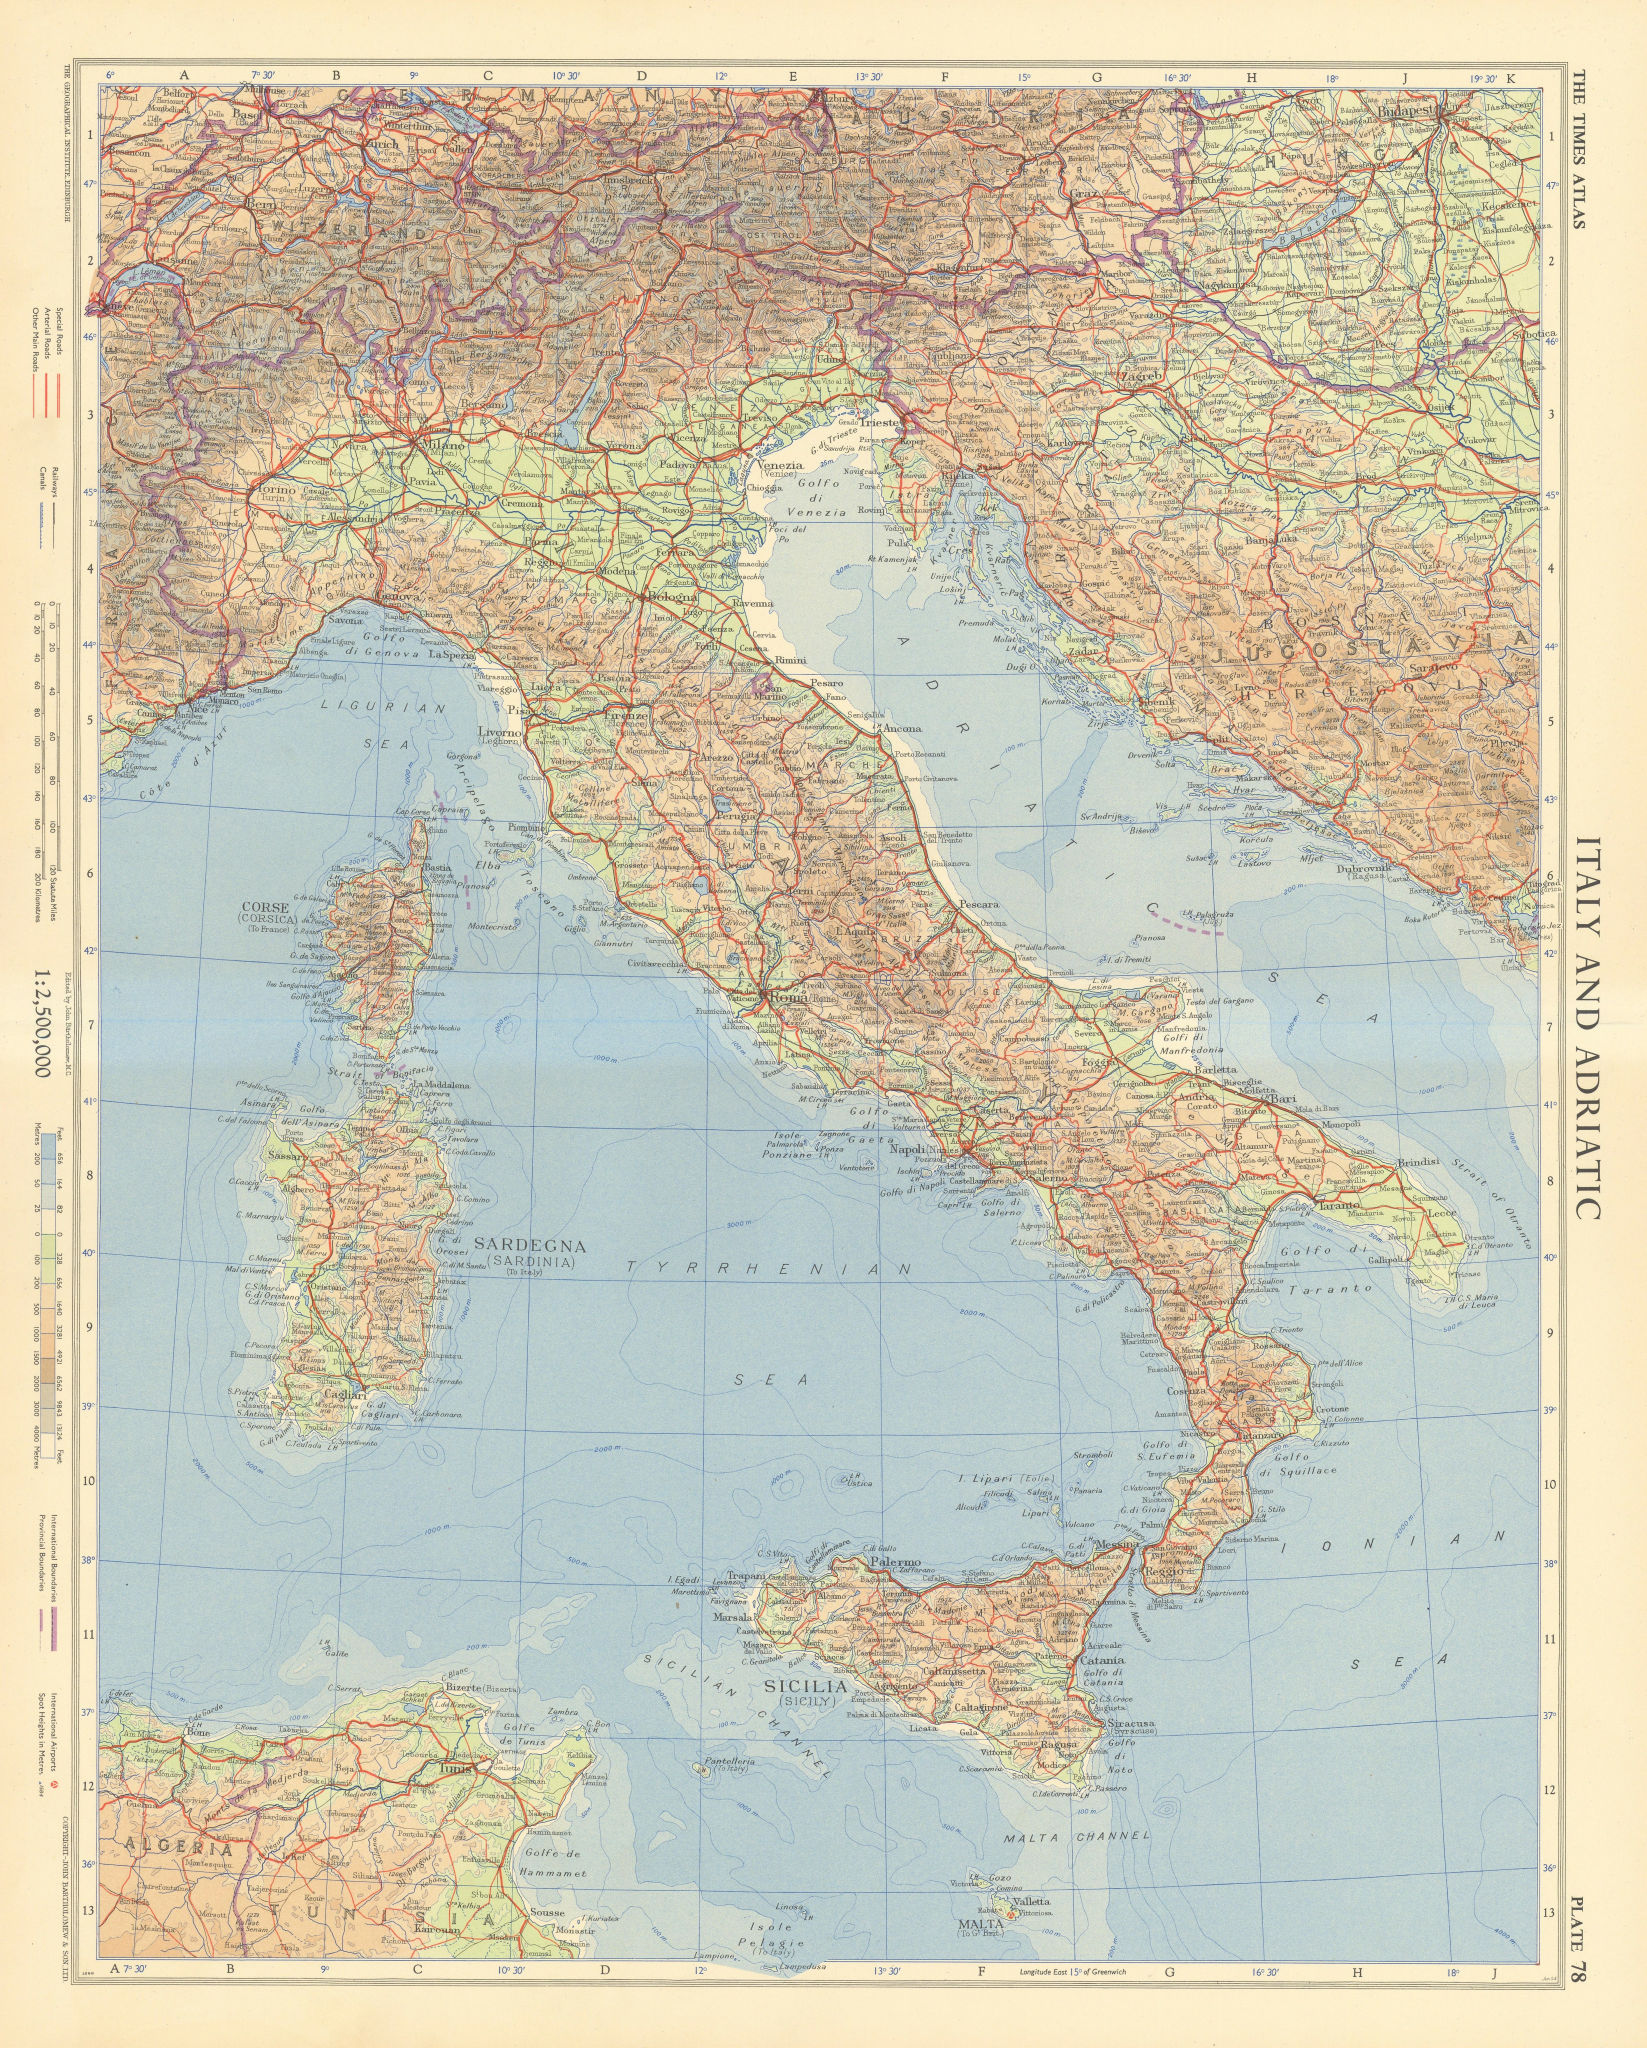 Associate Product Italy and the Adriatic. Road network. Autostrade. TIMES 1956 old vintage map